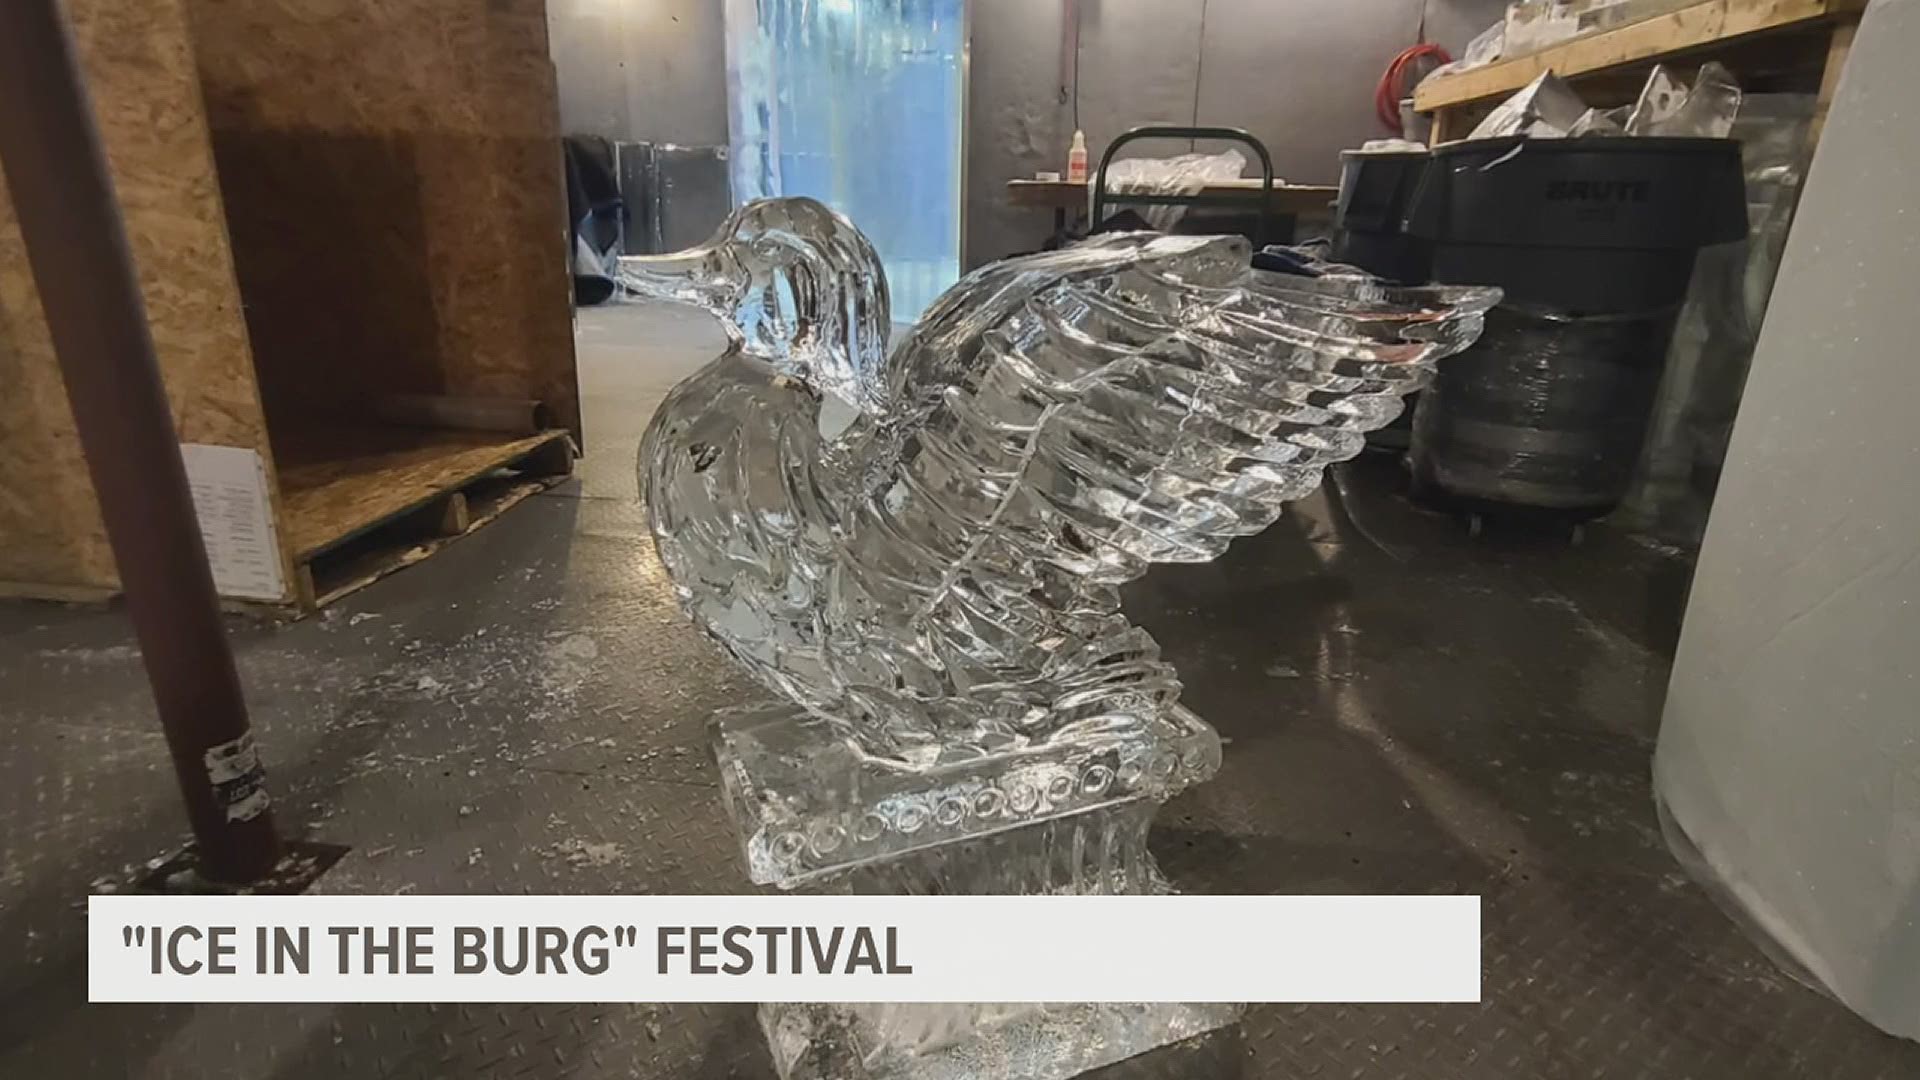 The annual Ice & Fire Festival has been modified for COVID-19 safety, but it will feature 55 large and small ice sculptures for viewing at locations across the city.